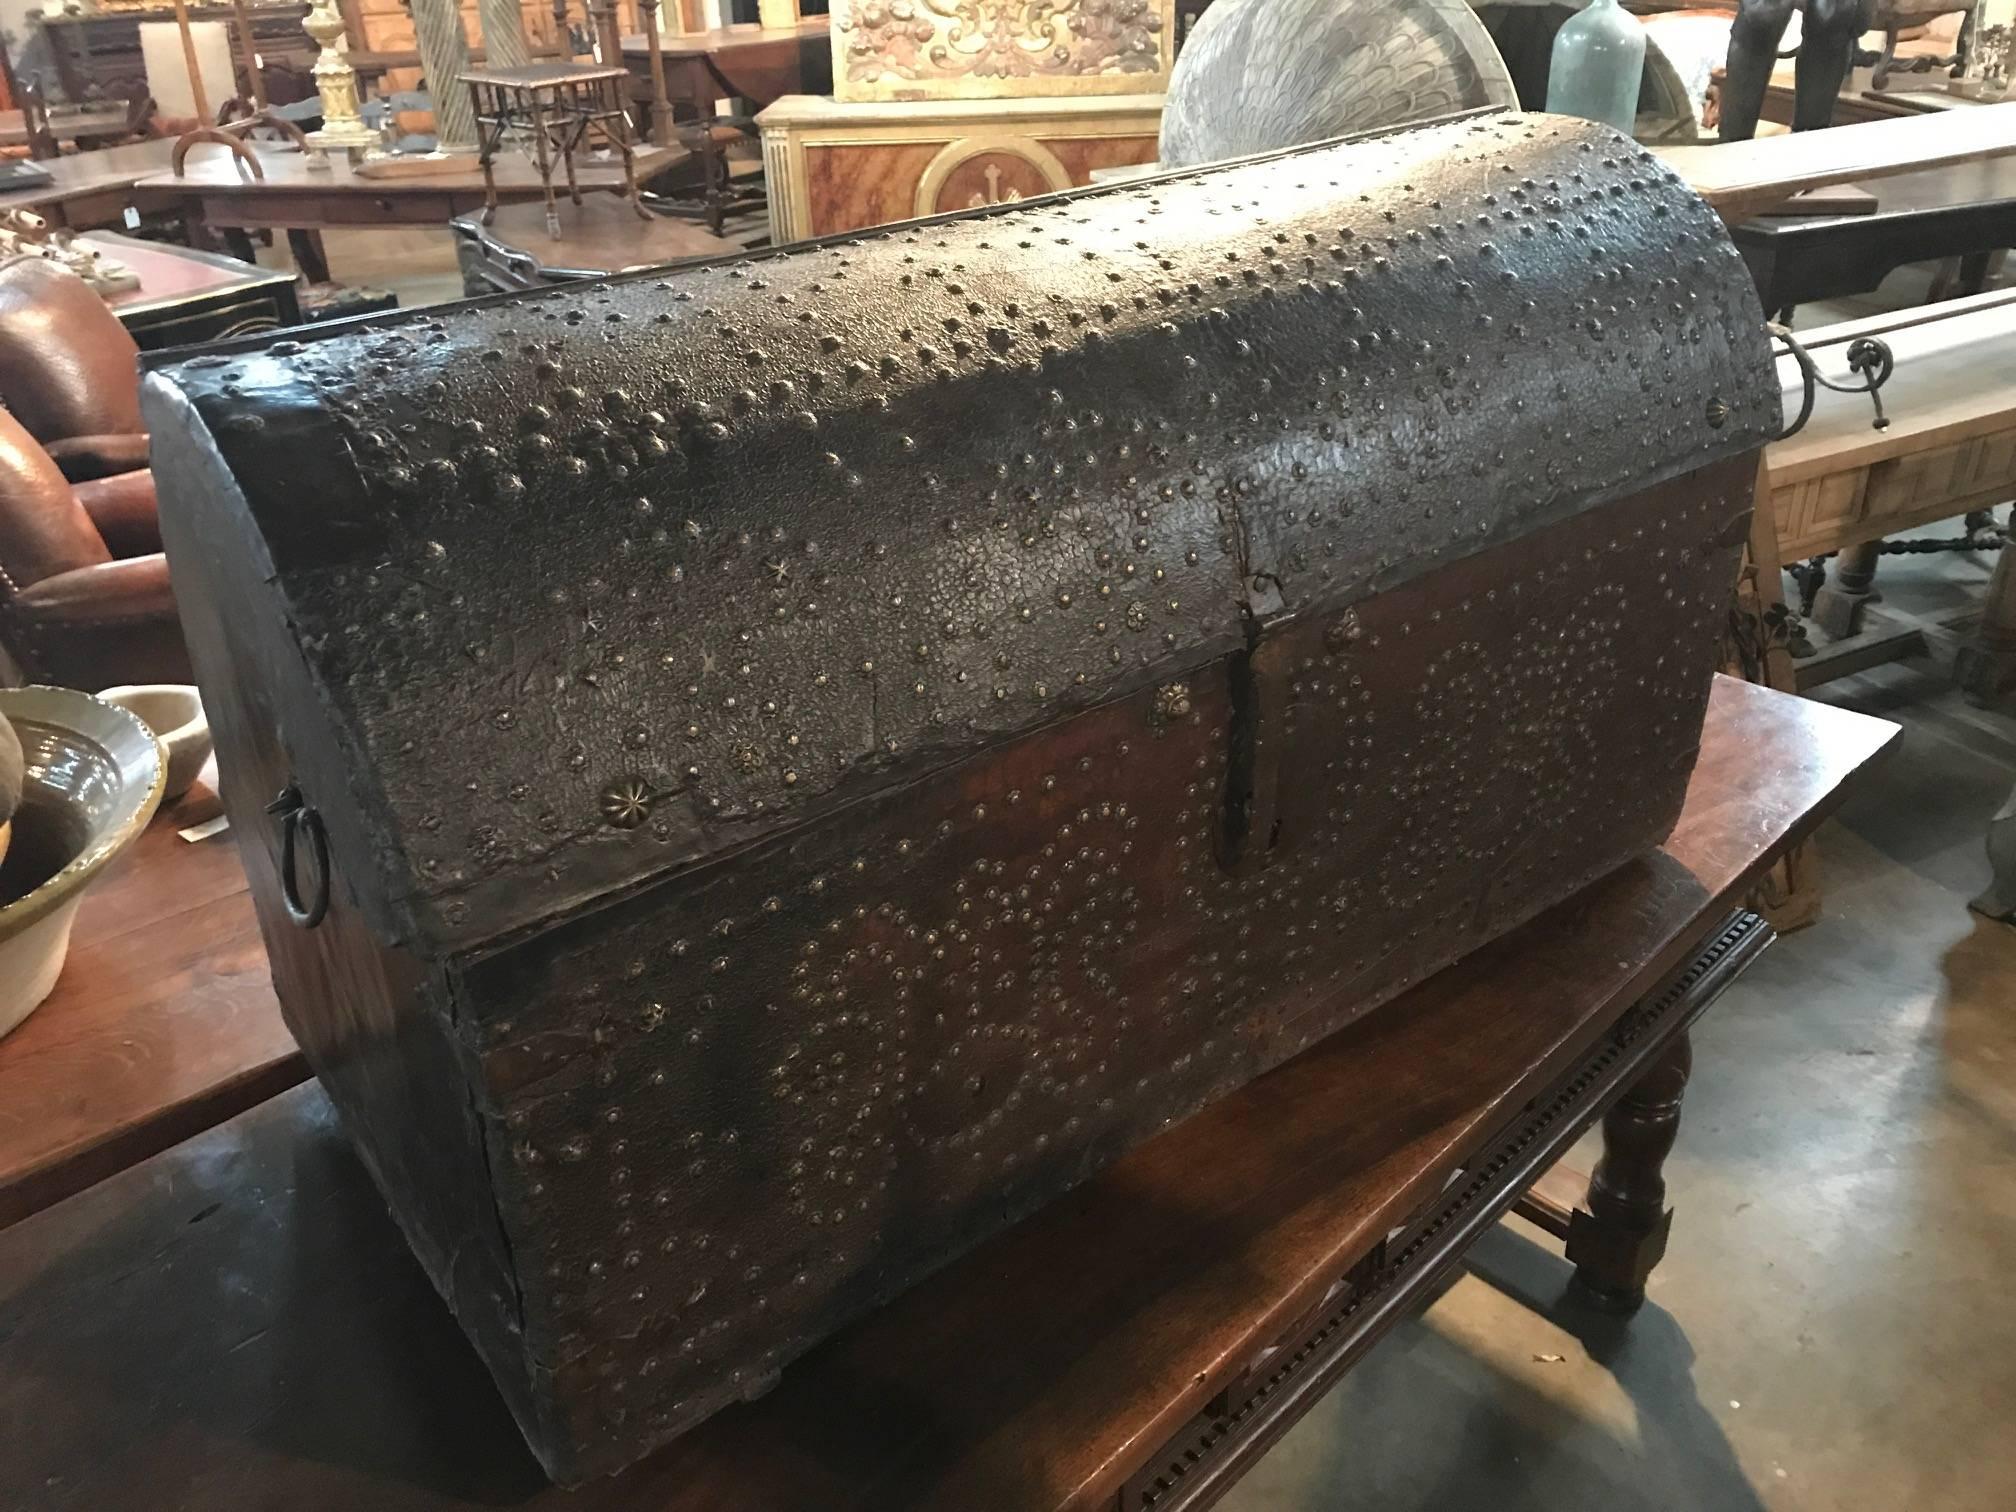 An outstanding 17th century marriage trunk Malle from the South of France. Wonderfully constructed from wood enveloped with richly patina'd leather. The bronze and iron hardware fittings are sensational. Perfect at the base of a bed, or under a